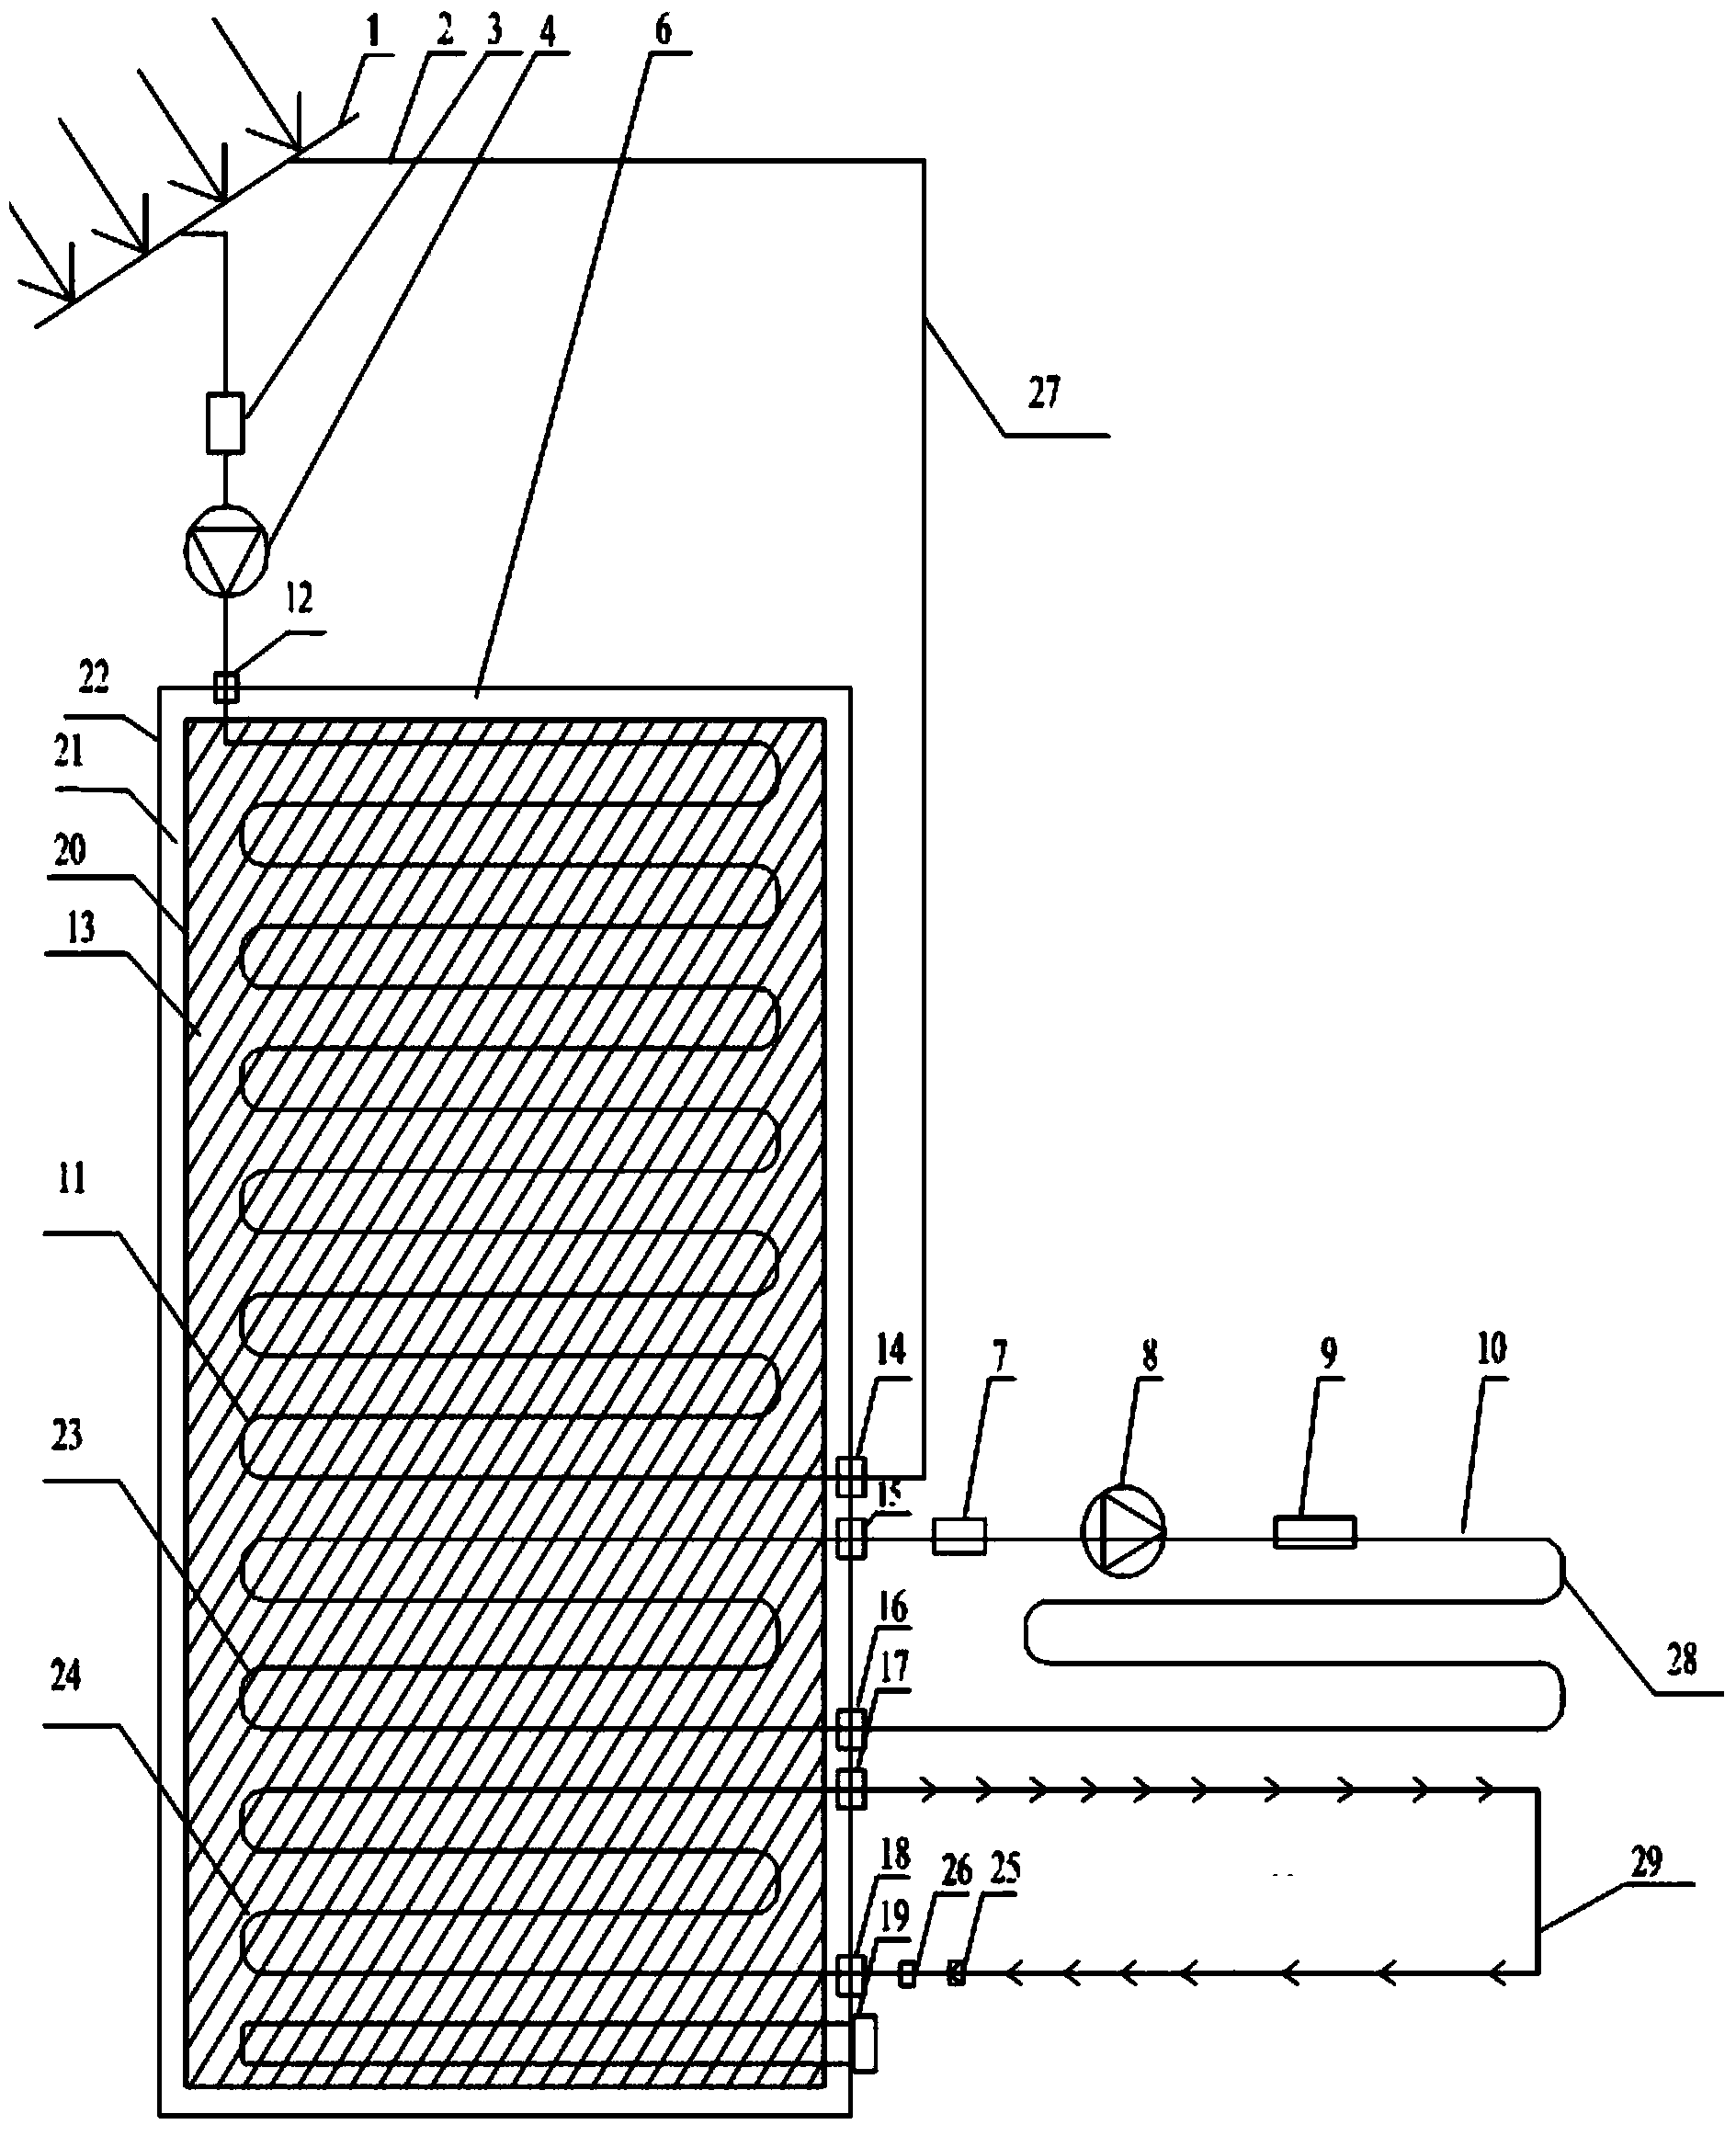 Solar heat accumulation and solar heating low-melting-point paraffin bathing device